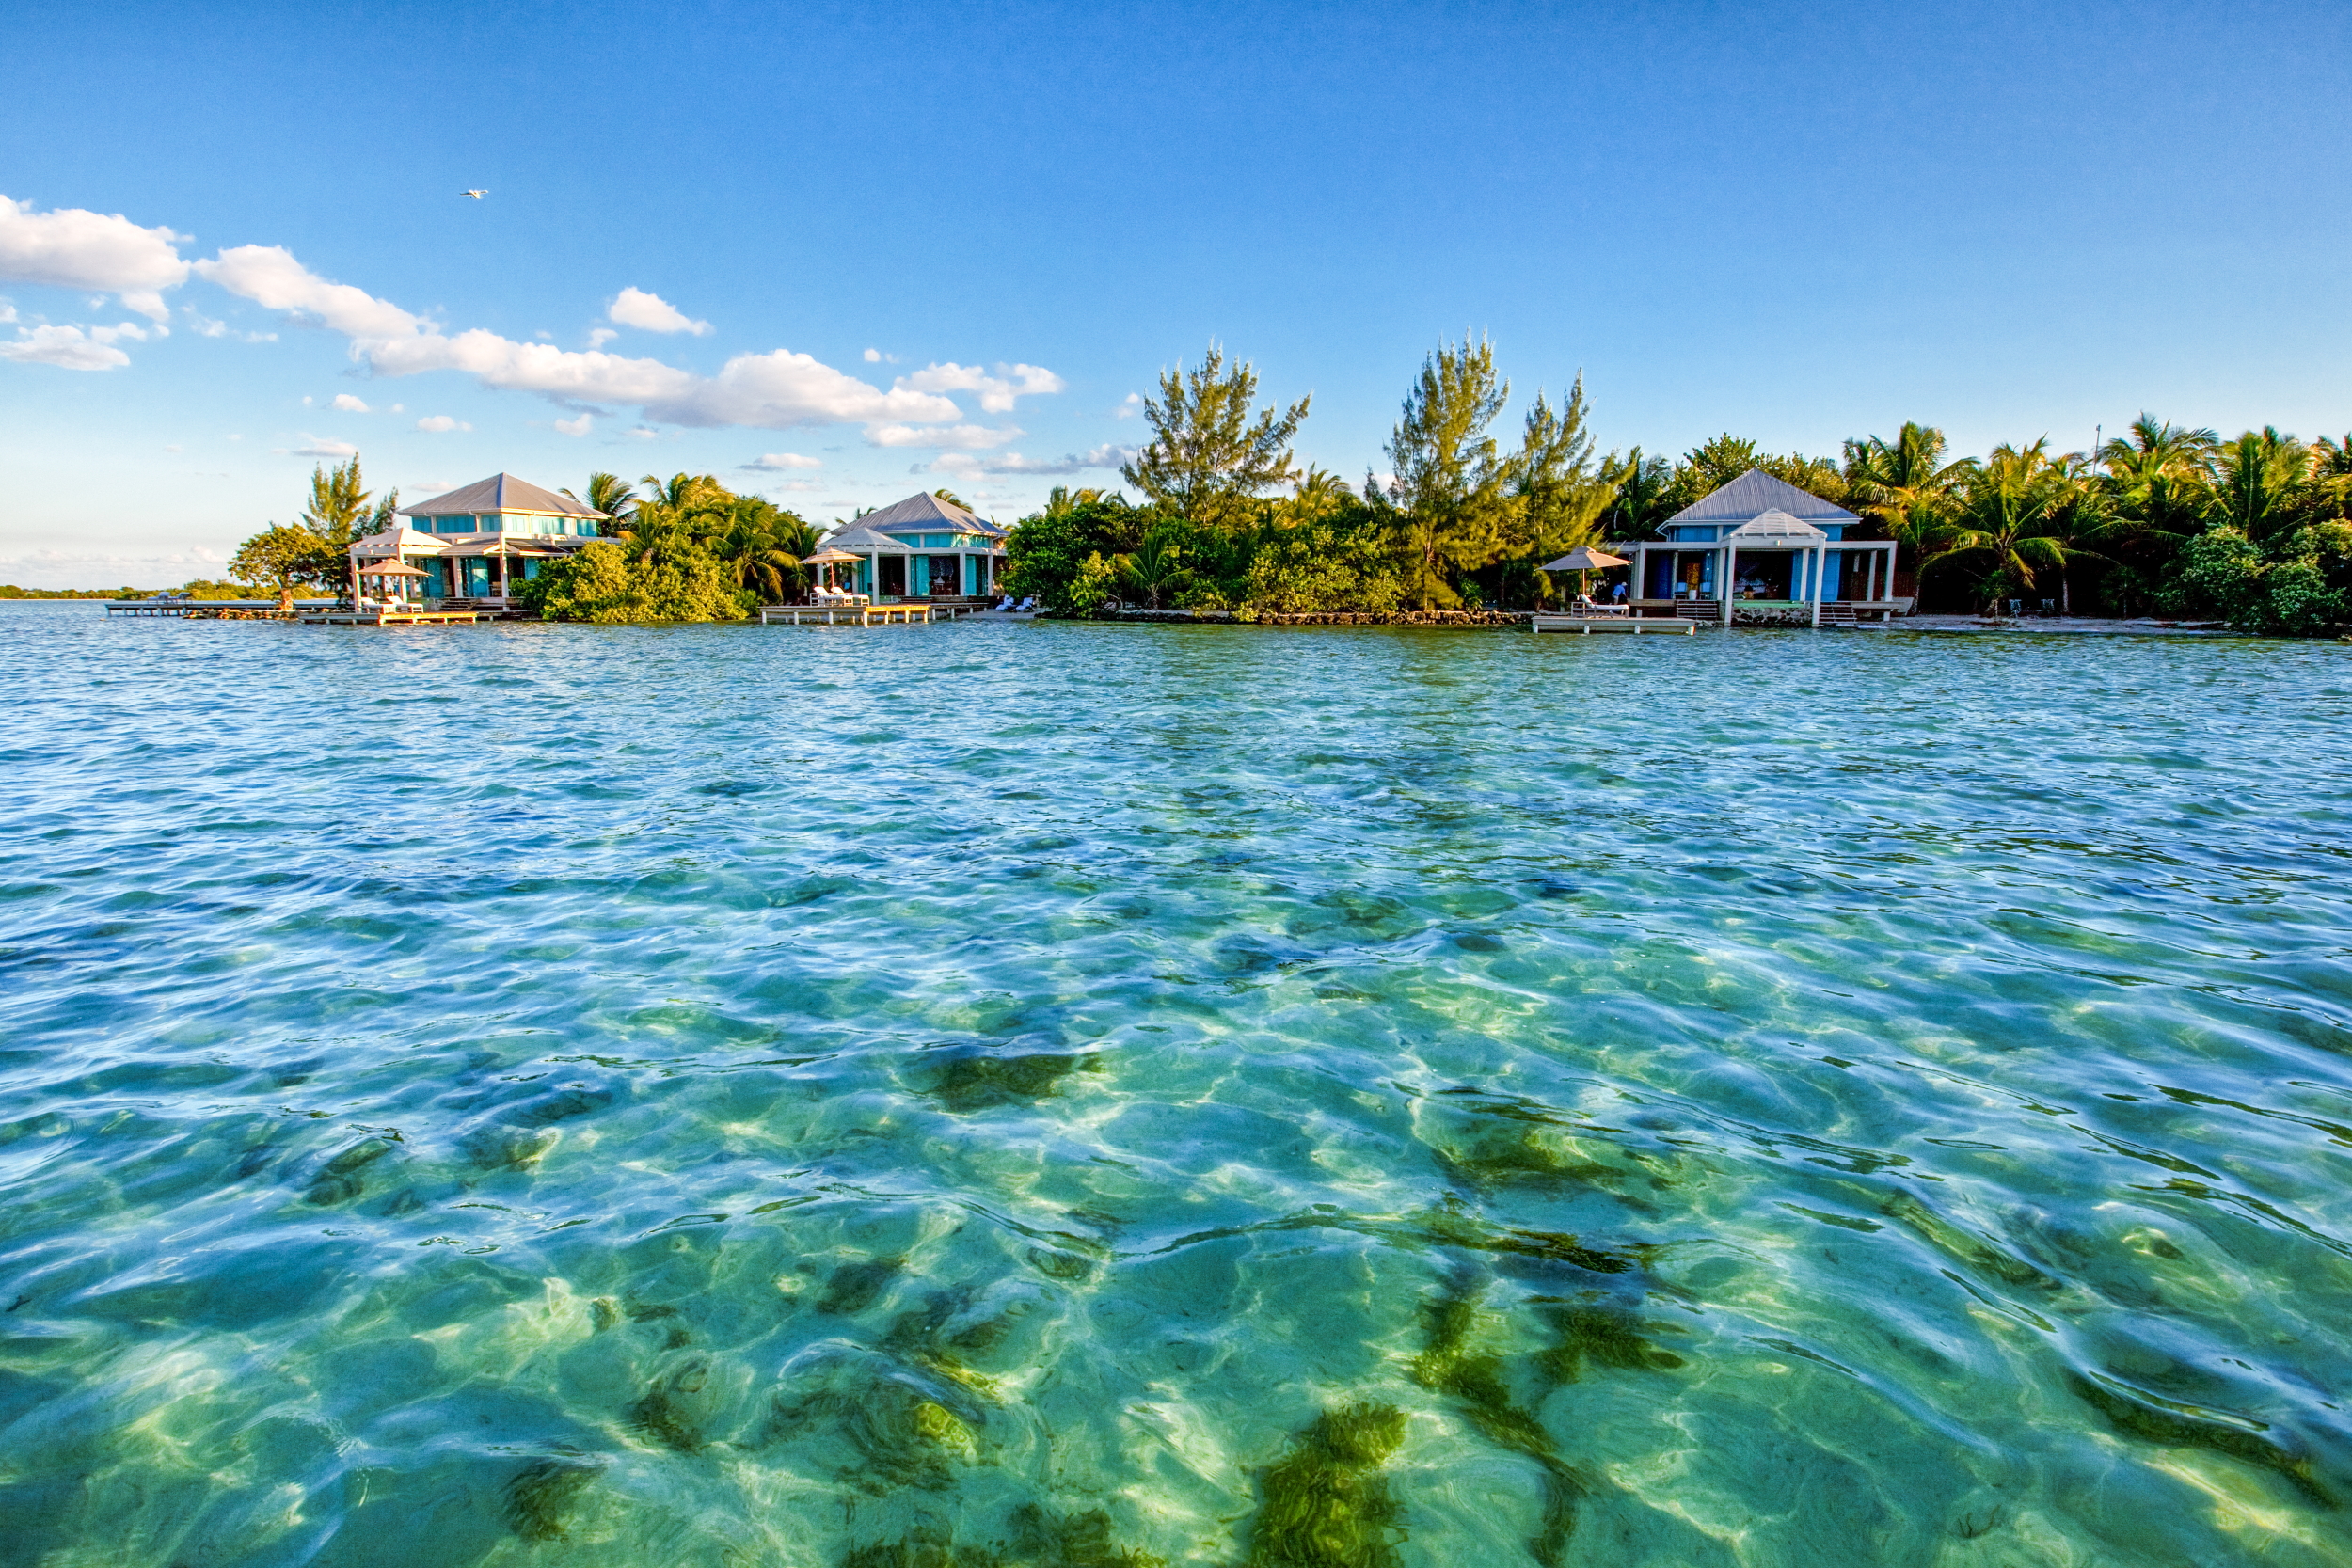 Important Factors to Consider When Planning a Private Island Vacation